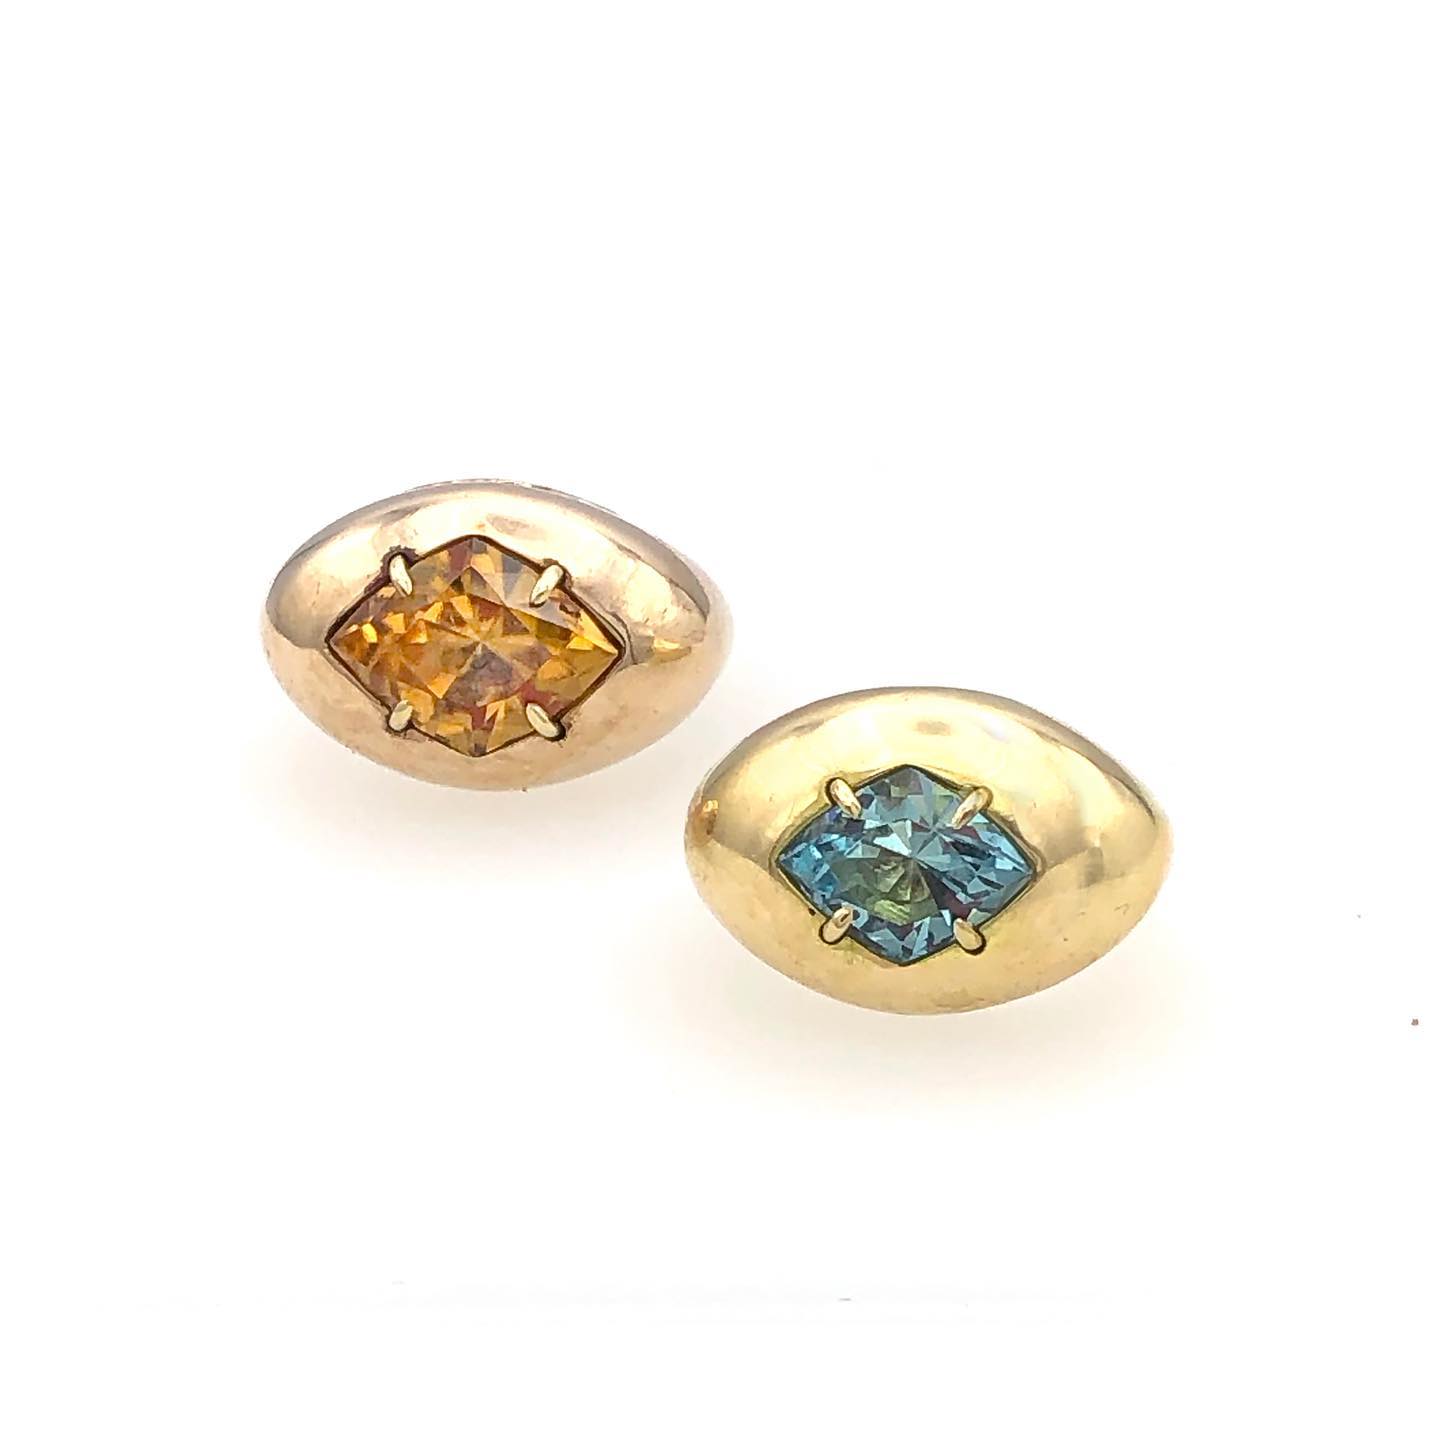 We’re pleased to offer fresh and modern design style jewelry with Russell Jones Jewelry.